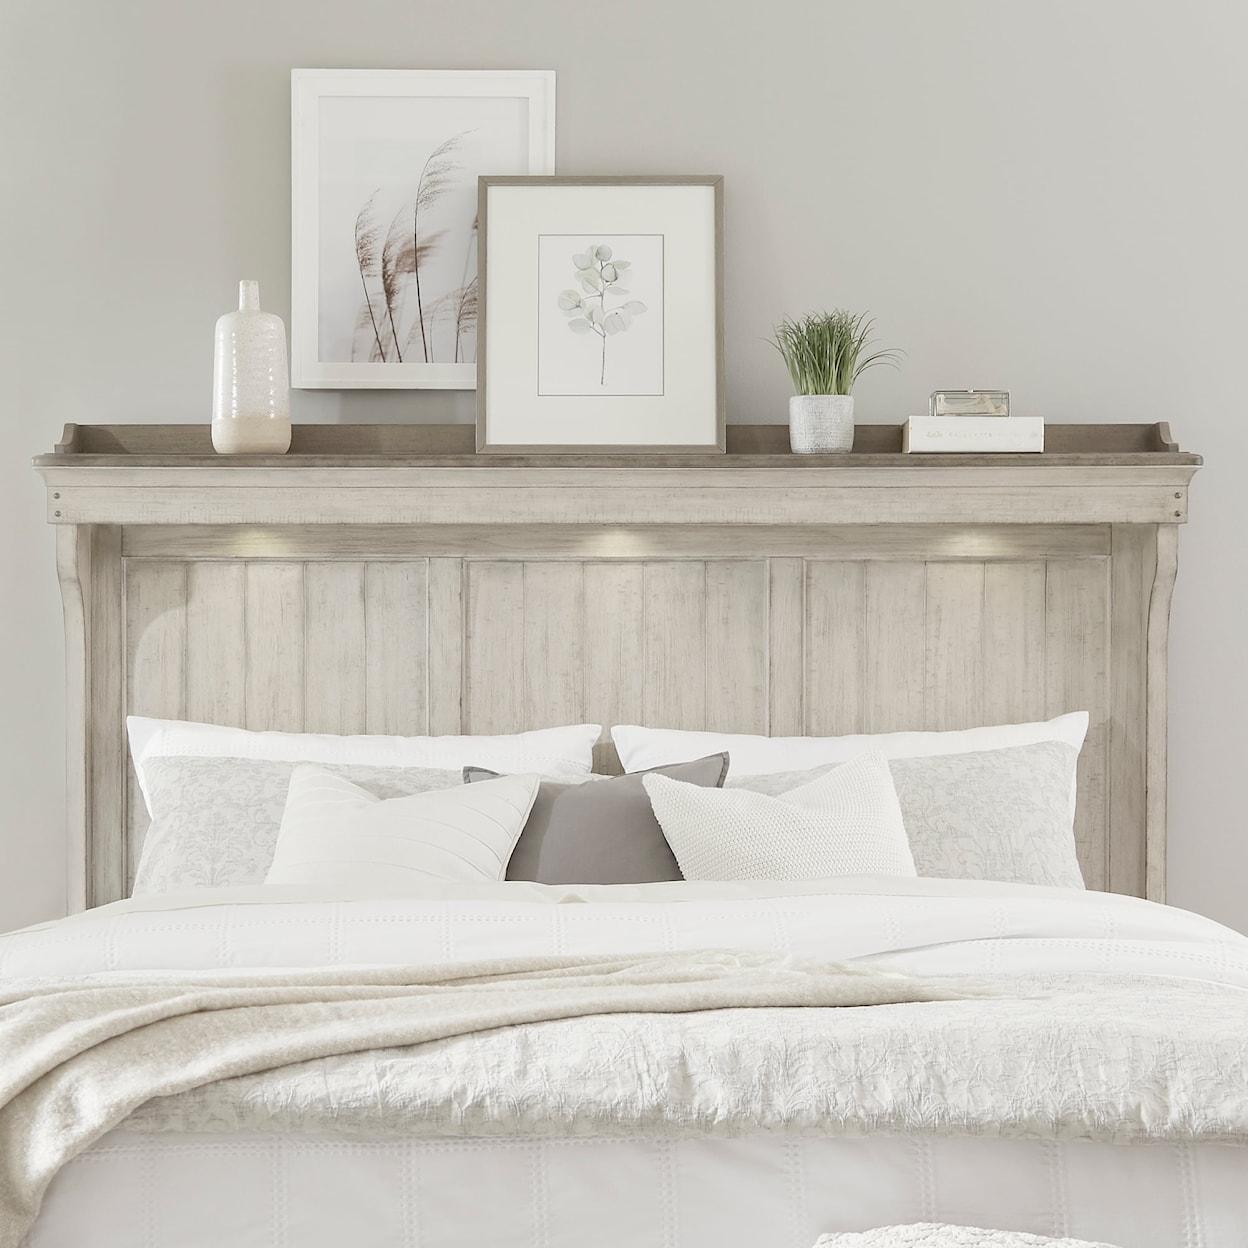 Libby Ivy Hollow King Mantle Headboard